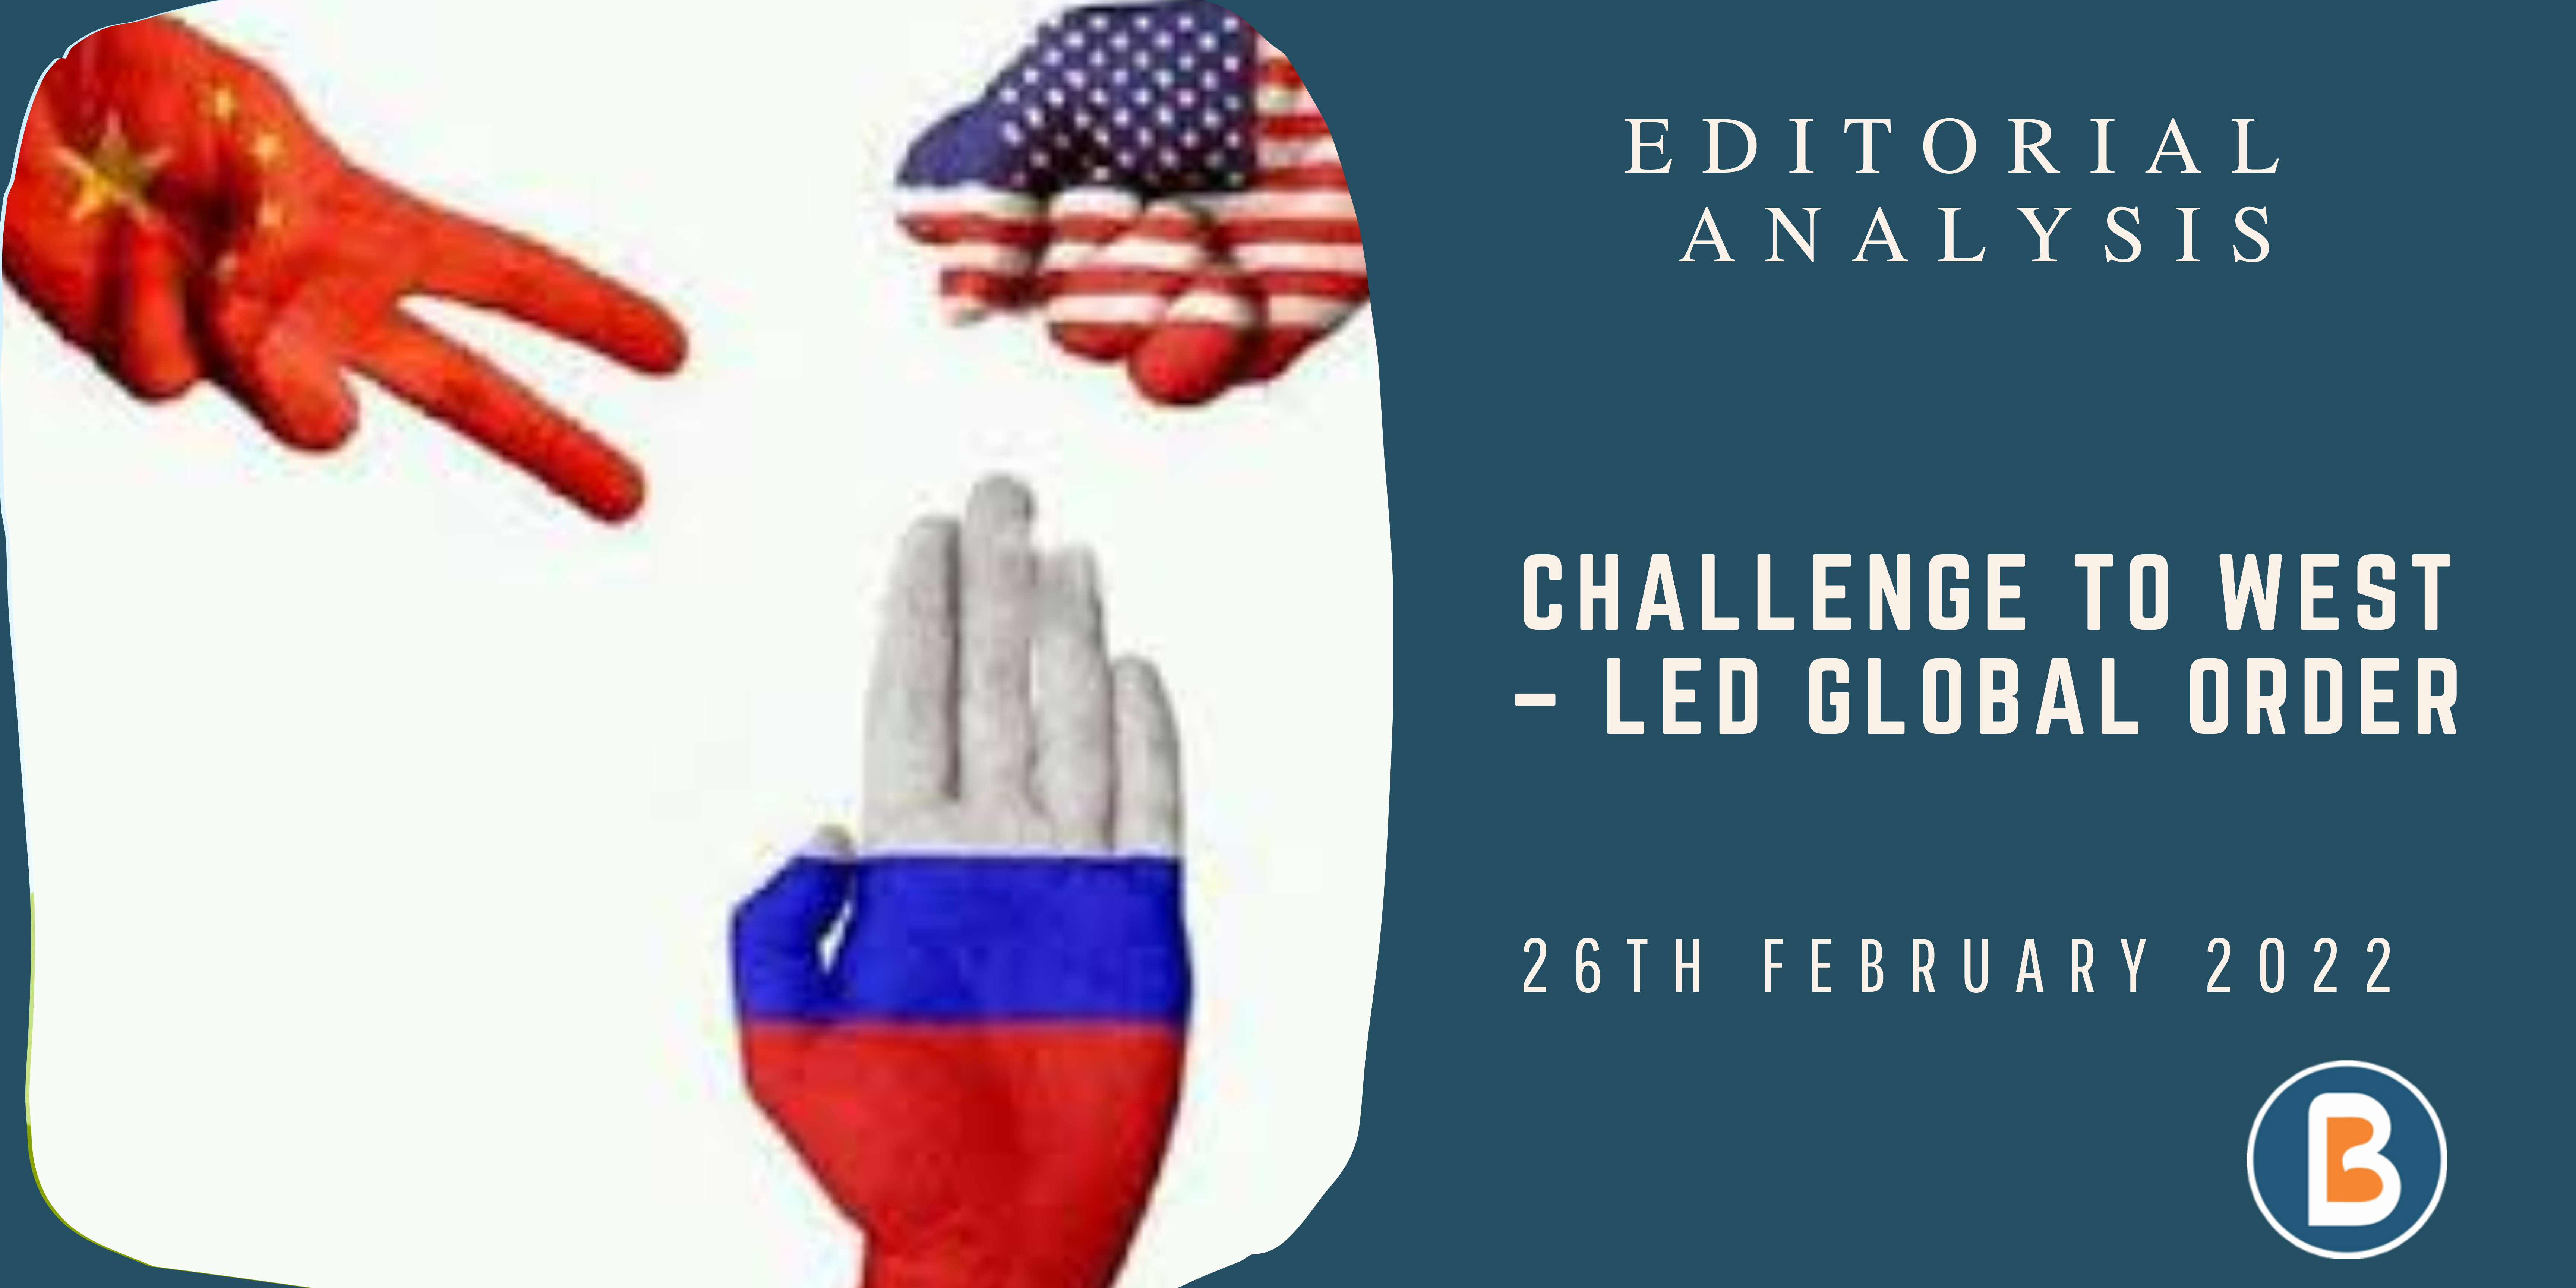 Editorial Analysis for IAS - Challenging the West-Led Global Order